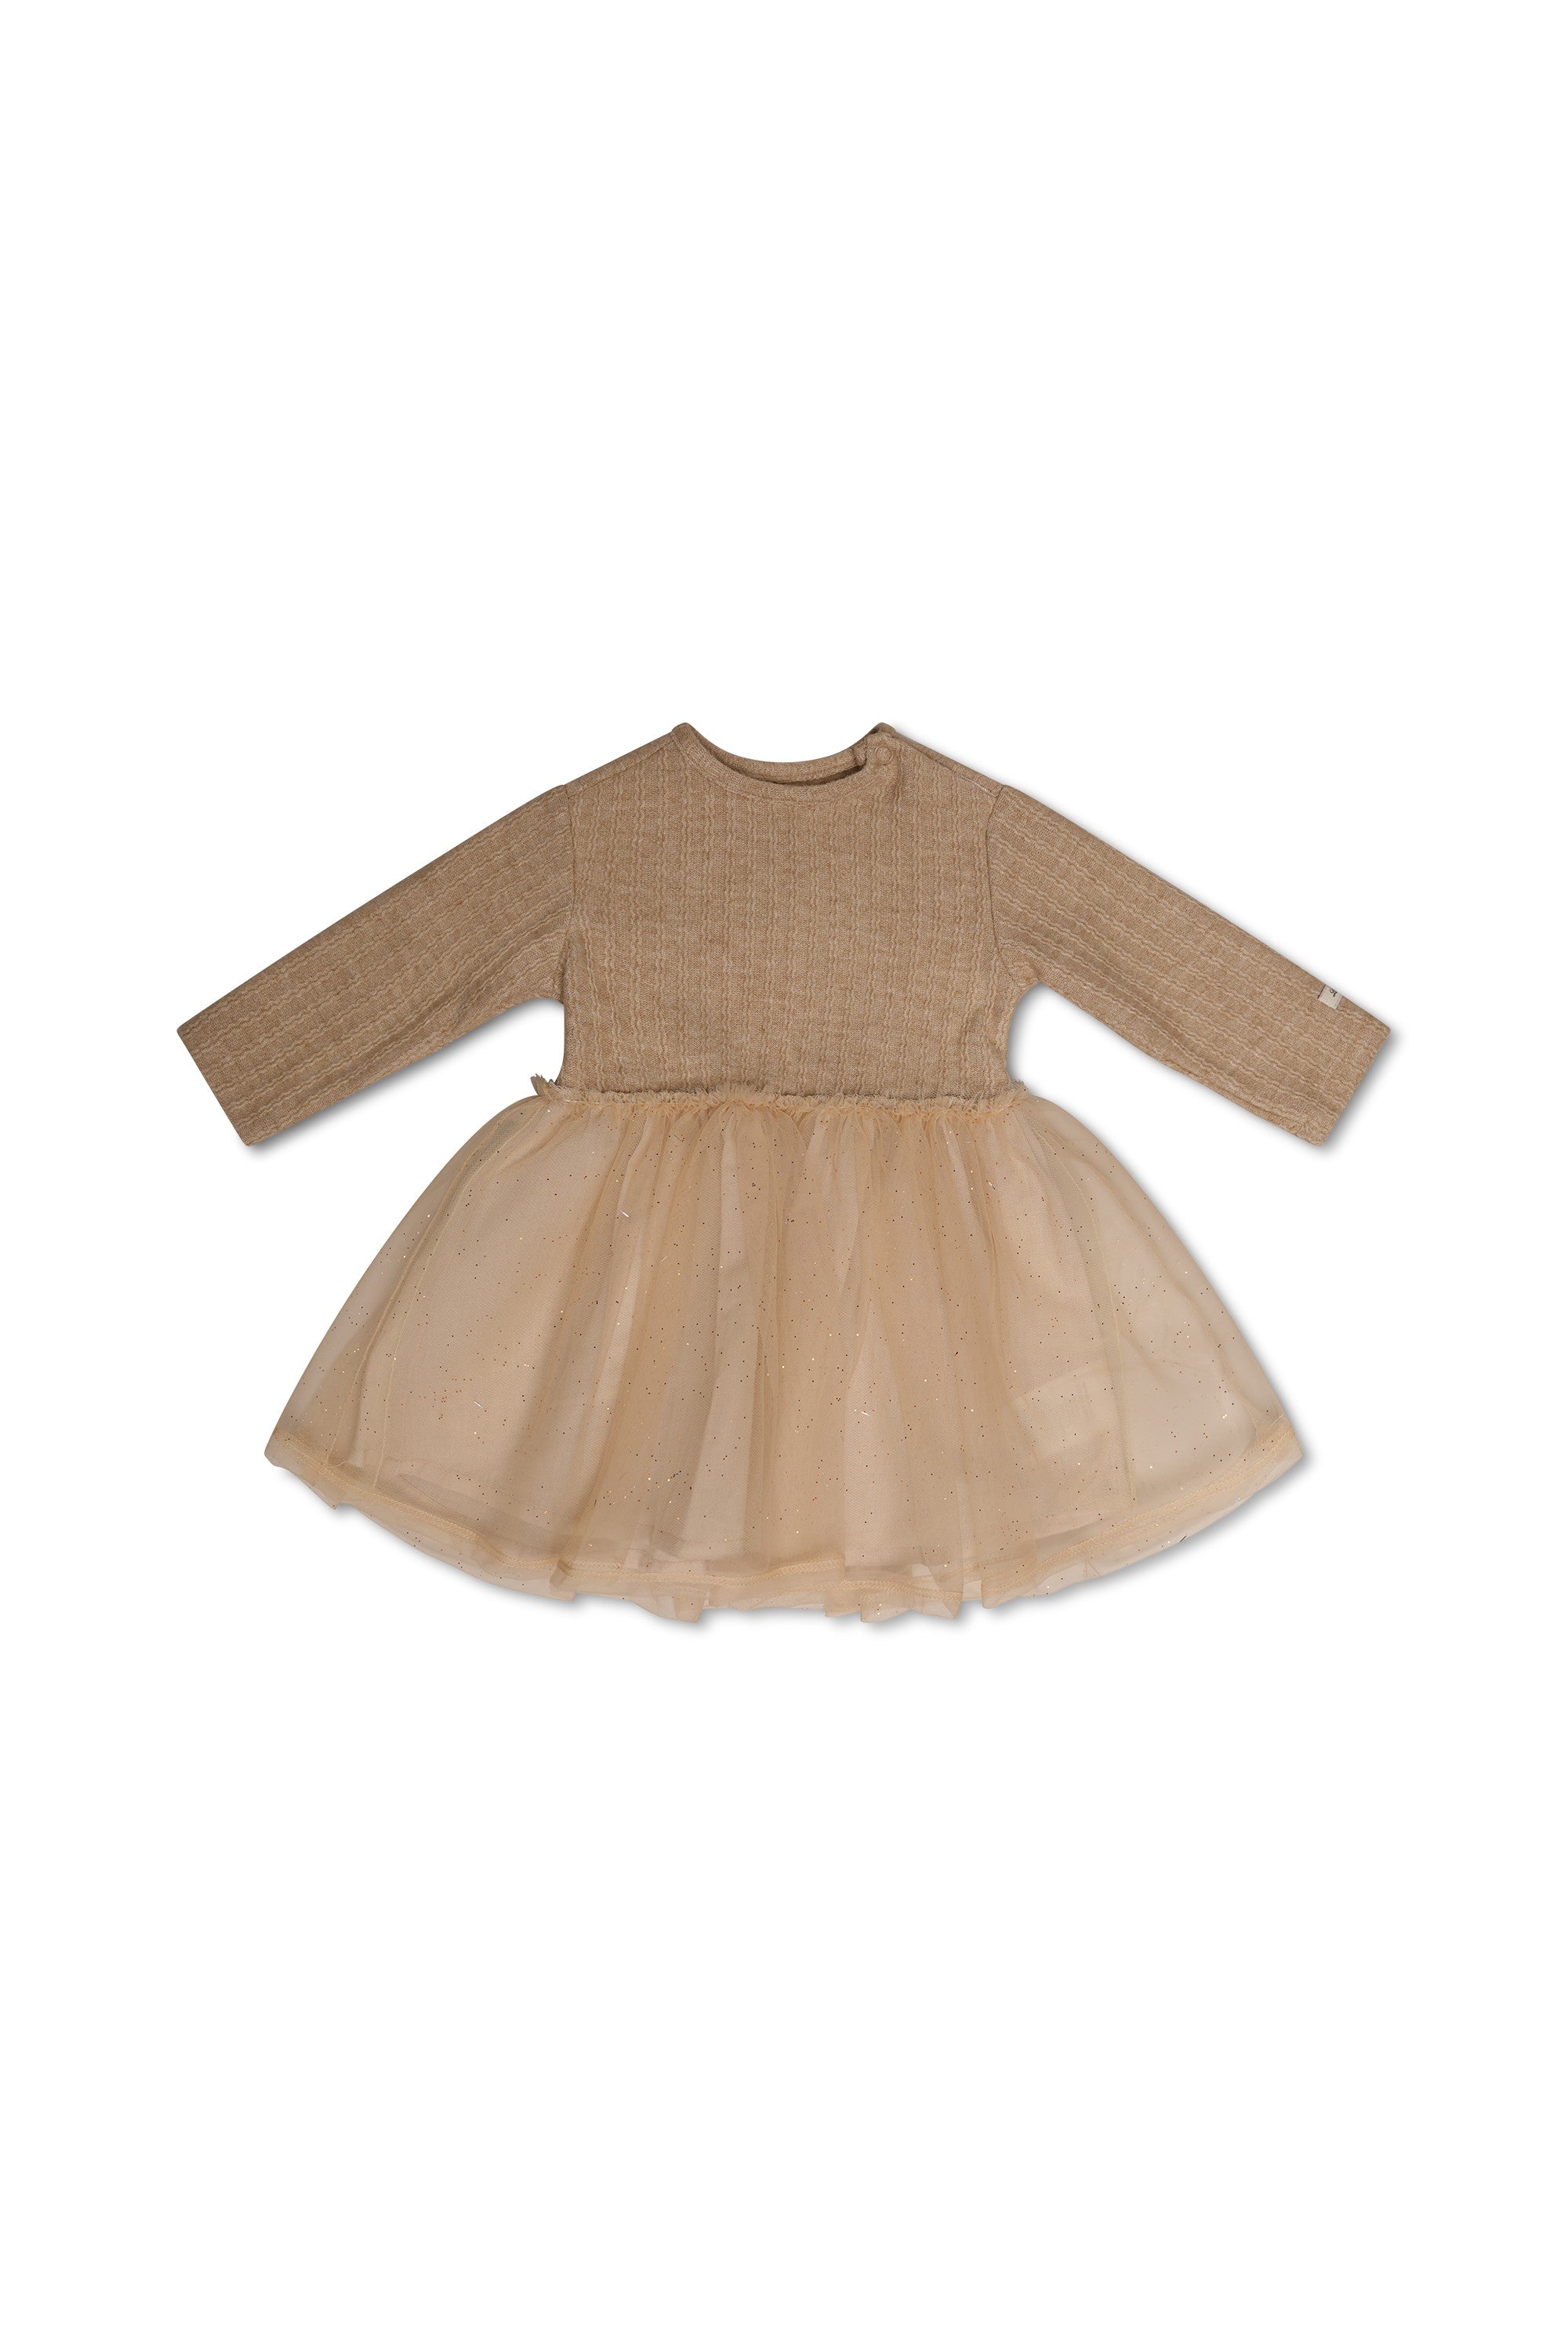 Solly Rib & Tulle Baby Dress - Light Cappuccino - Twinkle Twinkle Little One